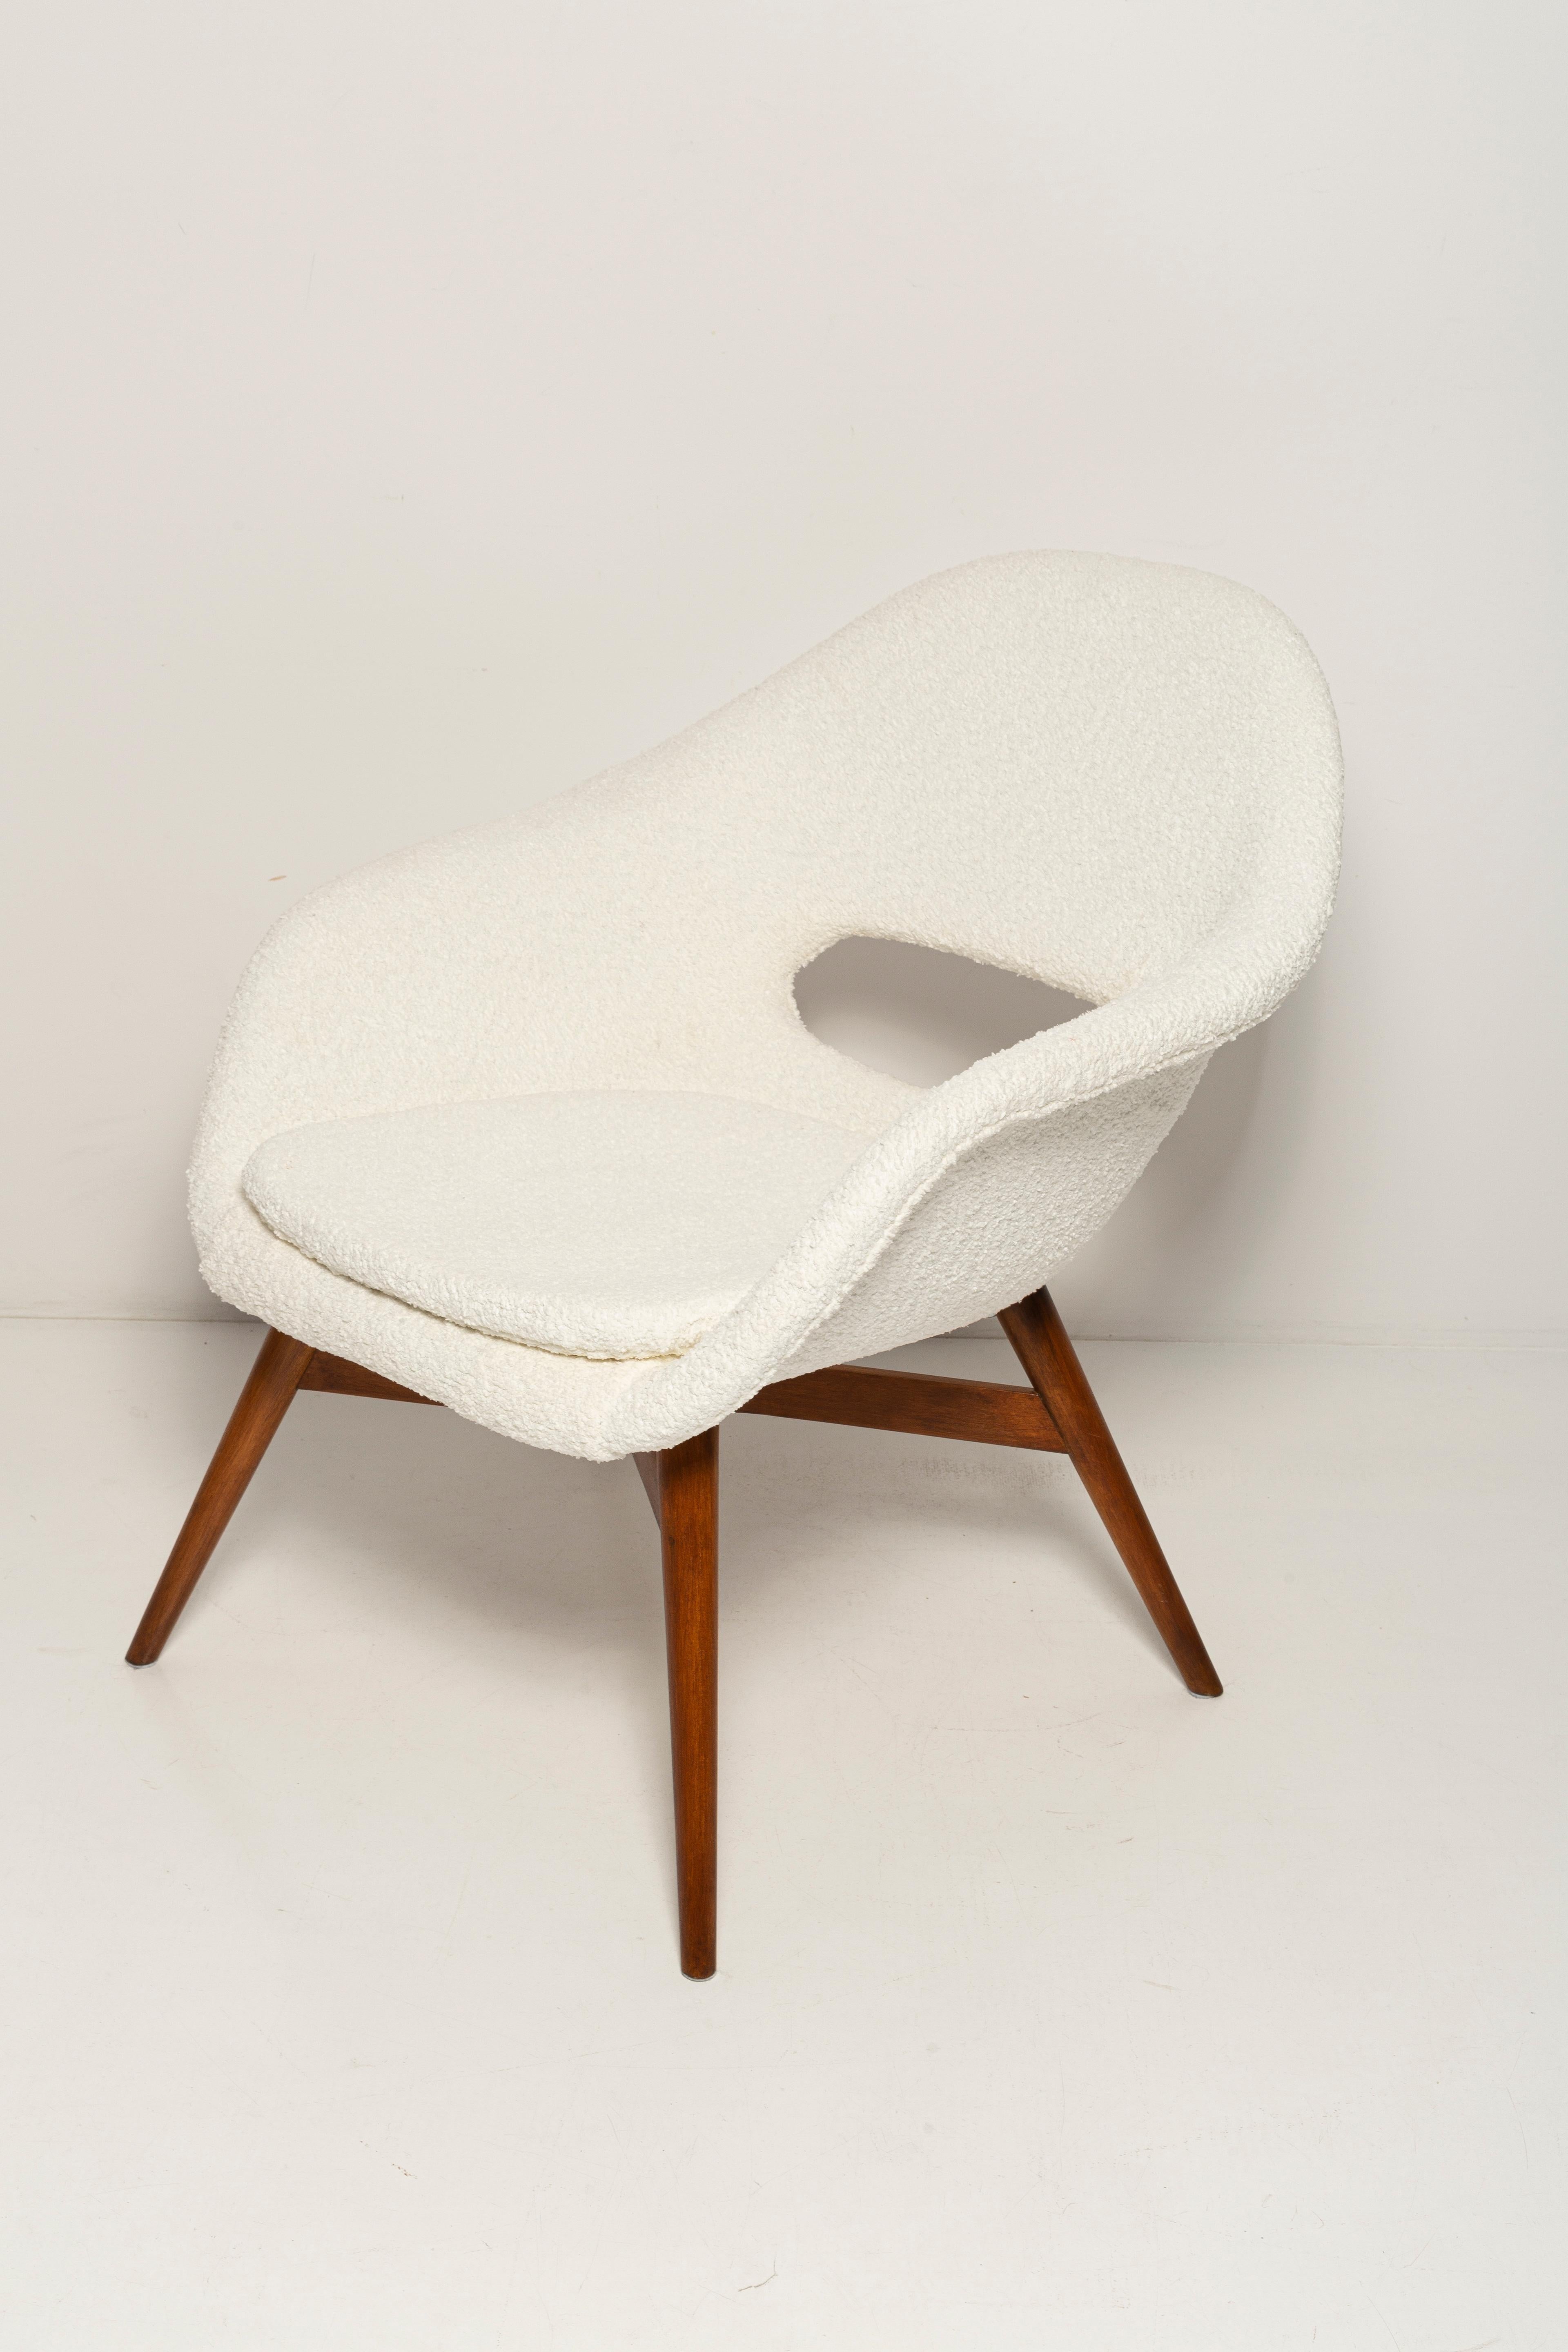 Set of 2 Mid Century White Boucle Shell Chairs, M Navratil, Czechoslovakia, 1960 For Sale 2